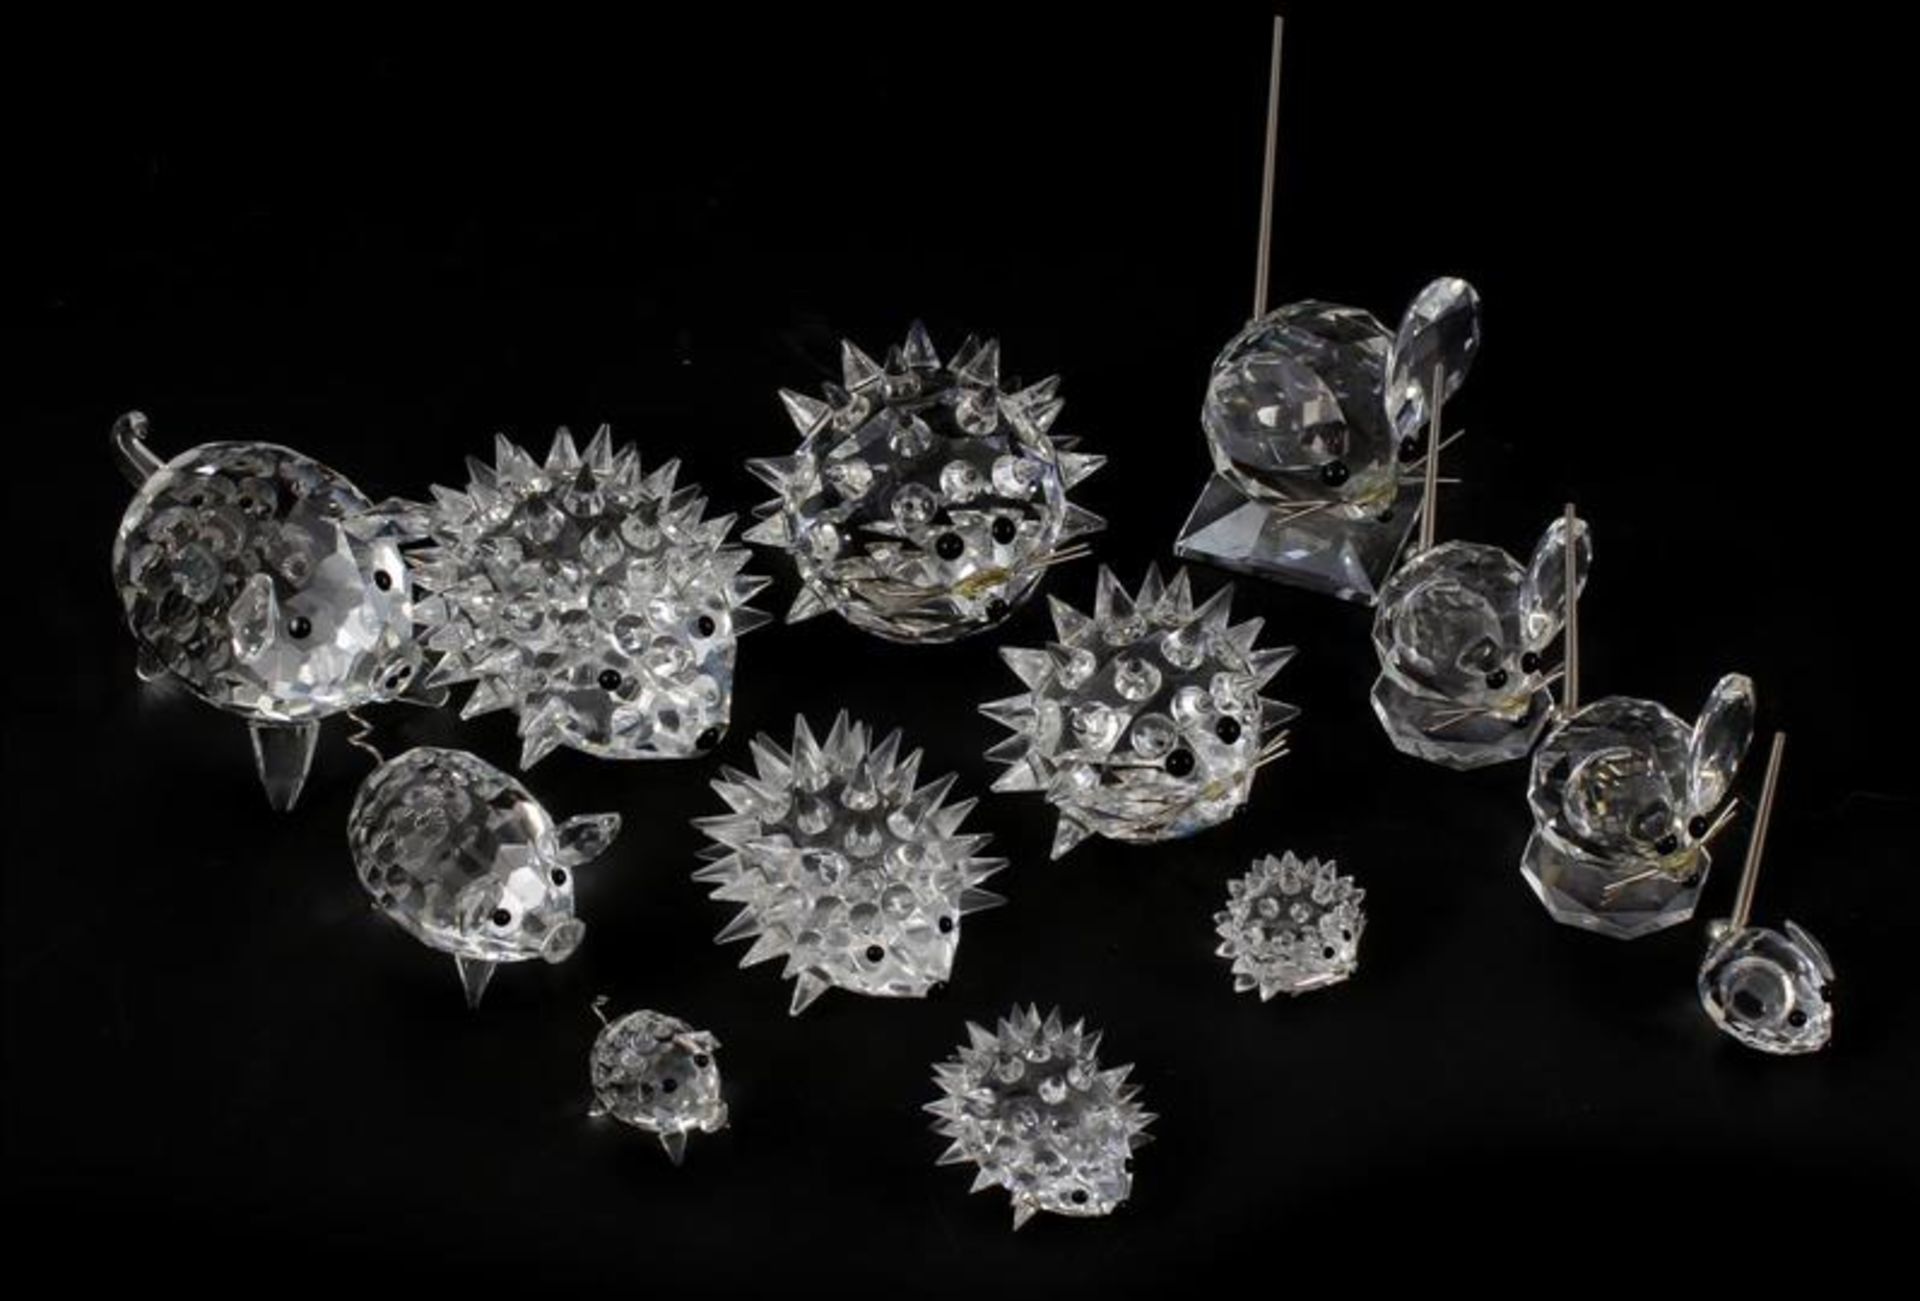 6 Swarovski crystal hedgehogs, the largest 5 cm high, 4 mice and 3 pigs